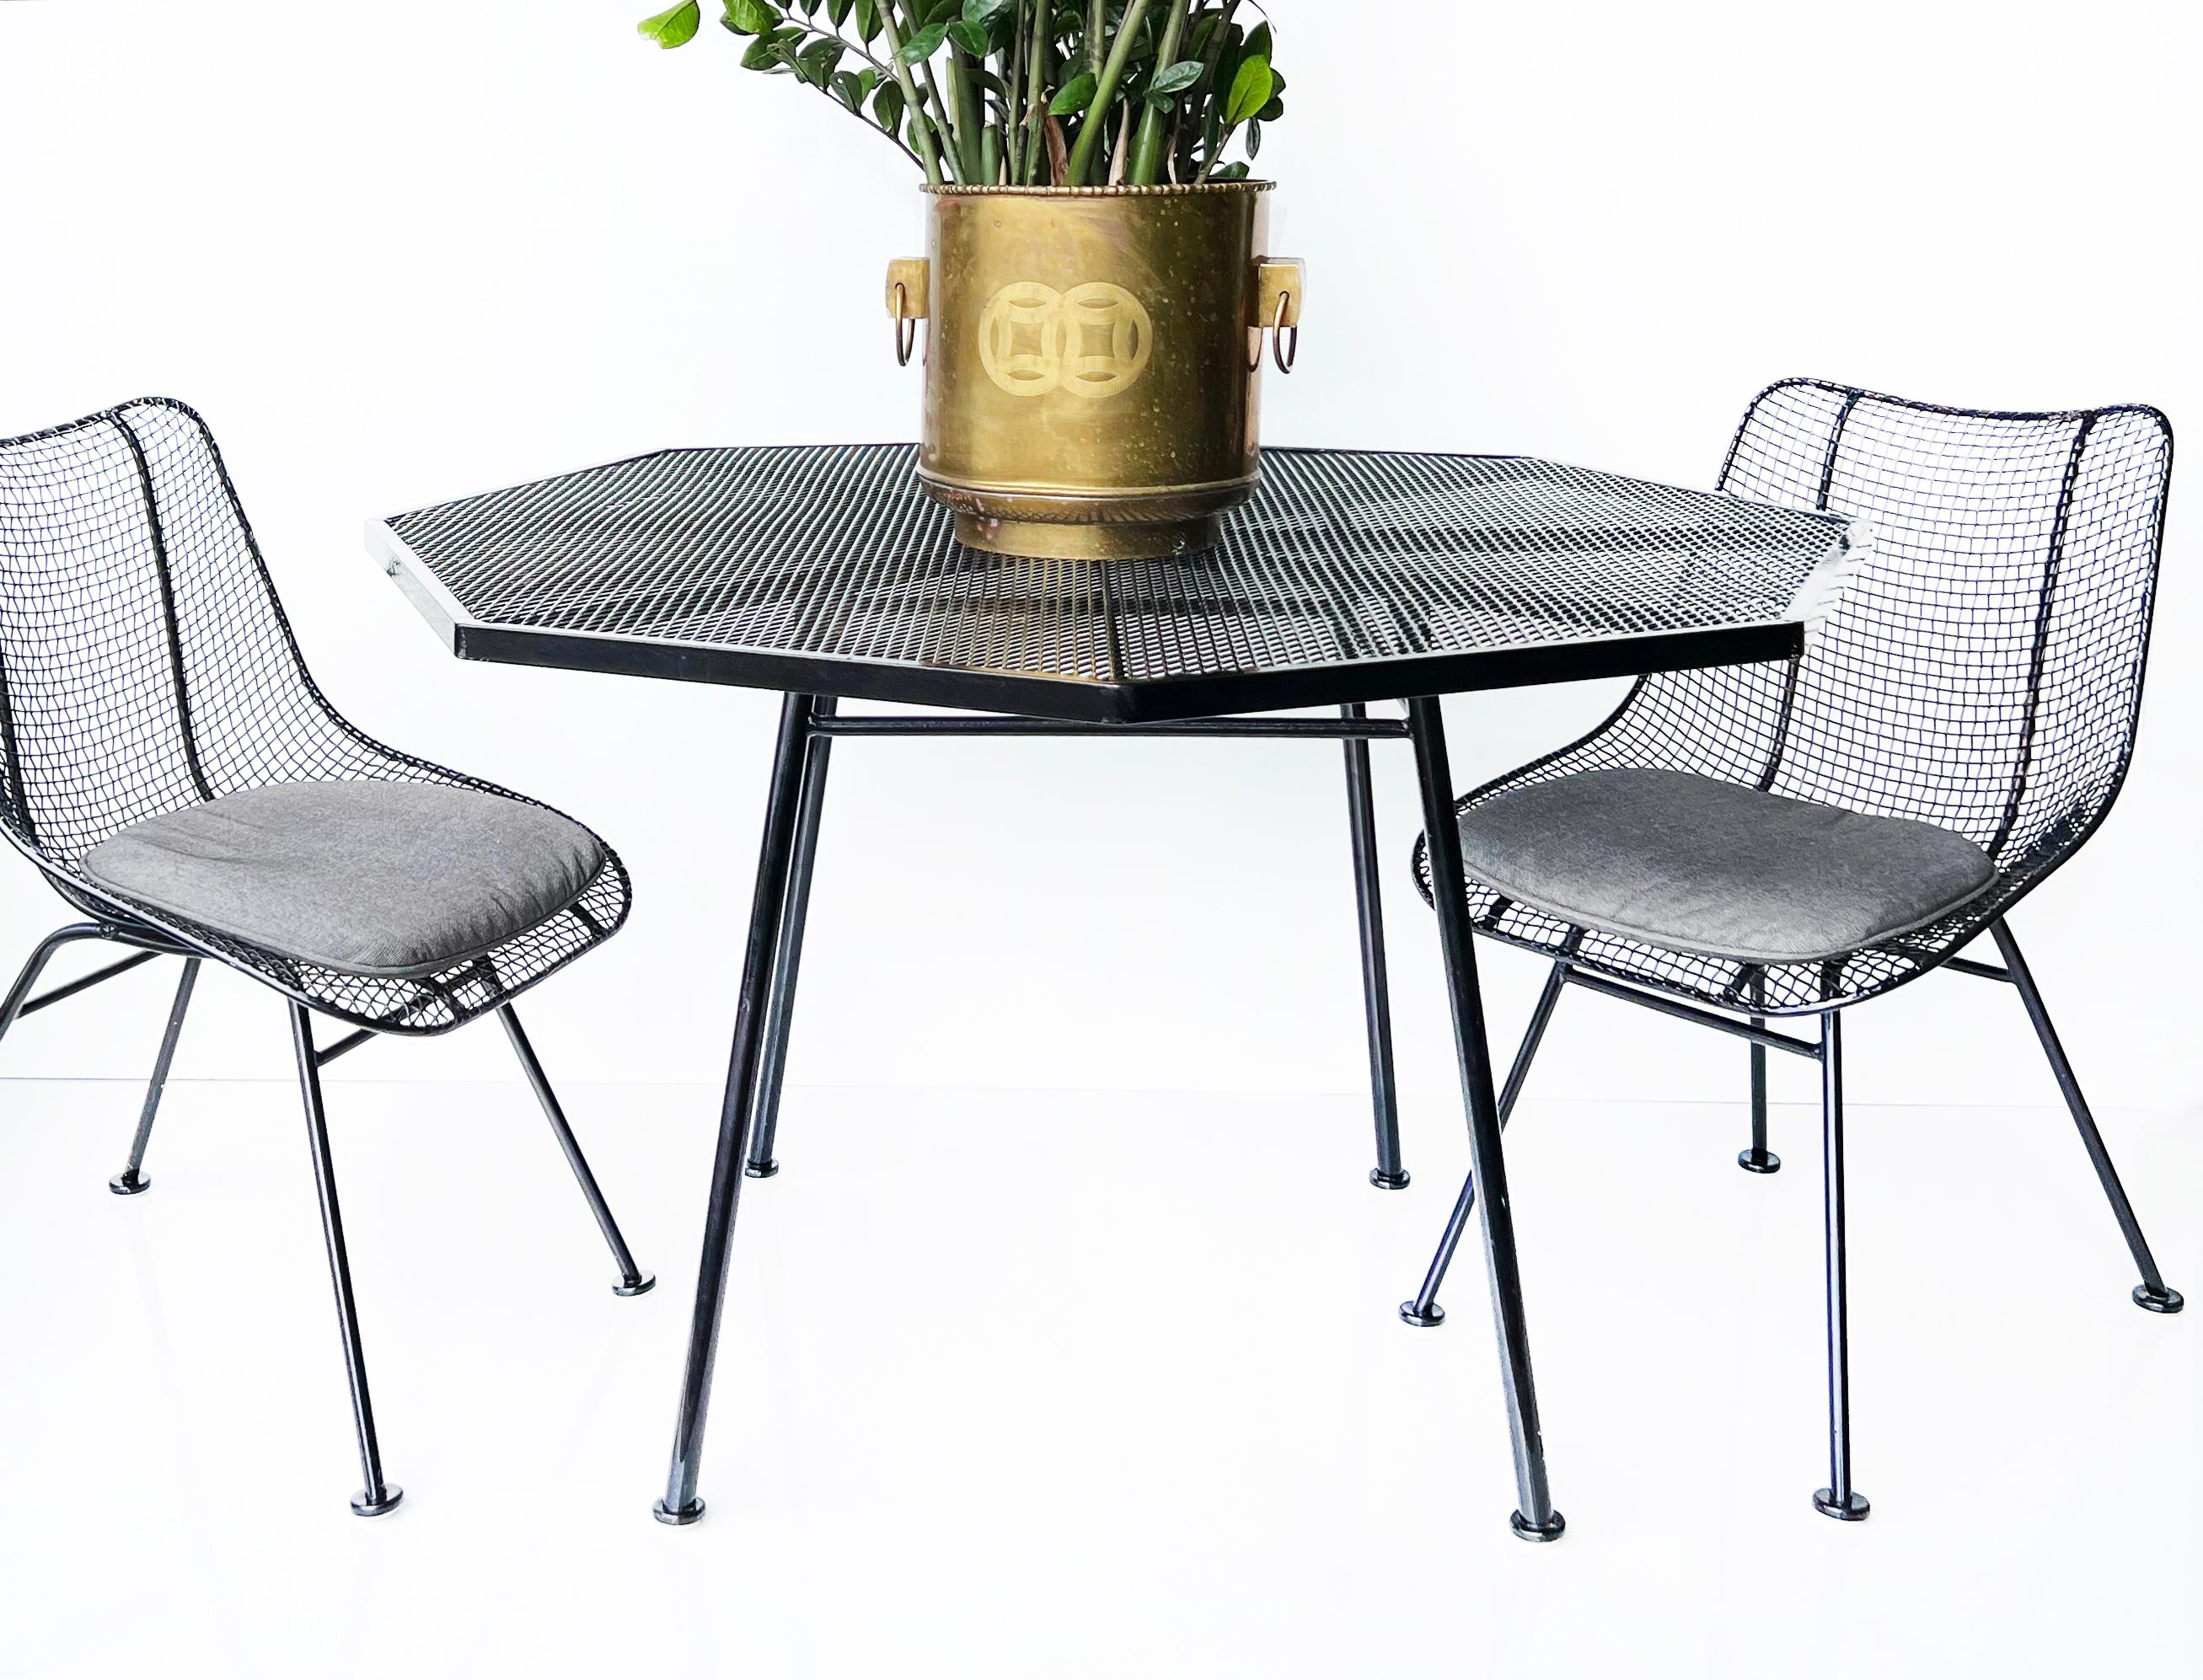 Mid-century Russell Woodard Octagonal Mesh Dining Table 

Offered for sale is a Mid-century Modern Russell Woodard octagonal iron mesh dining table. There is a center hole to place an umbrella. The table is shown with Woodard Sculptra chairs for